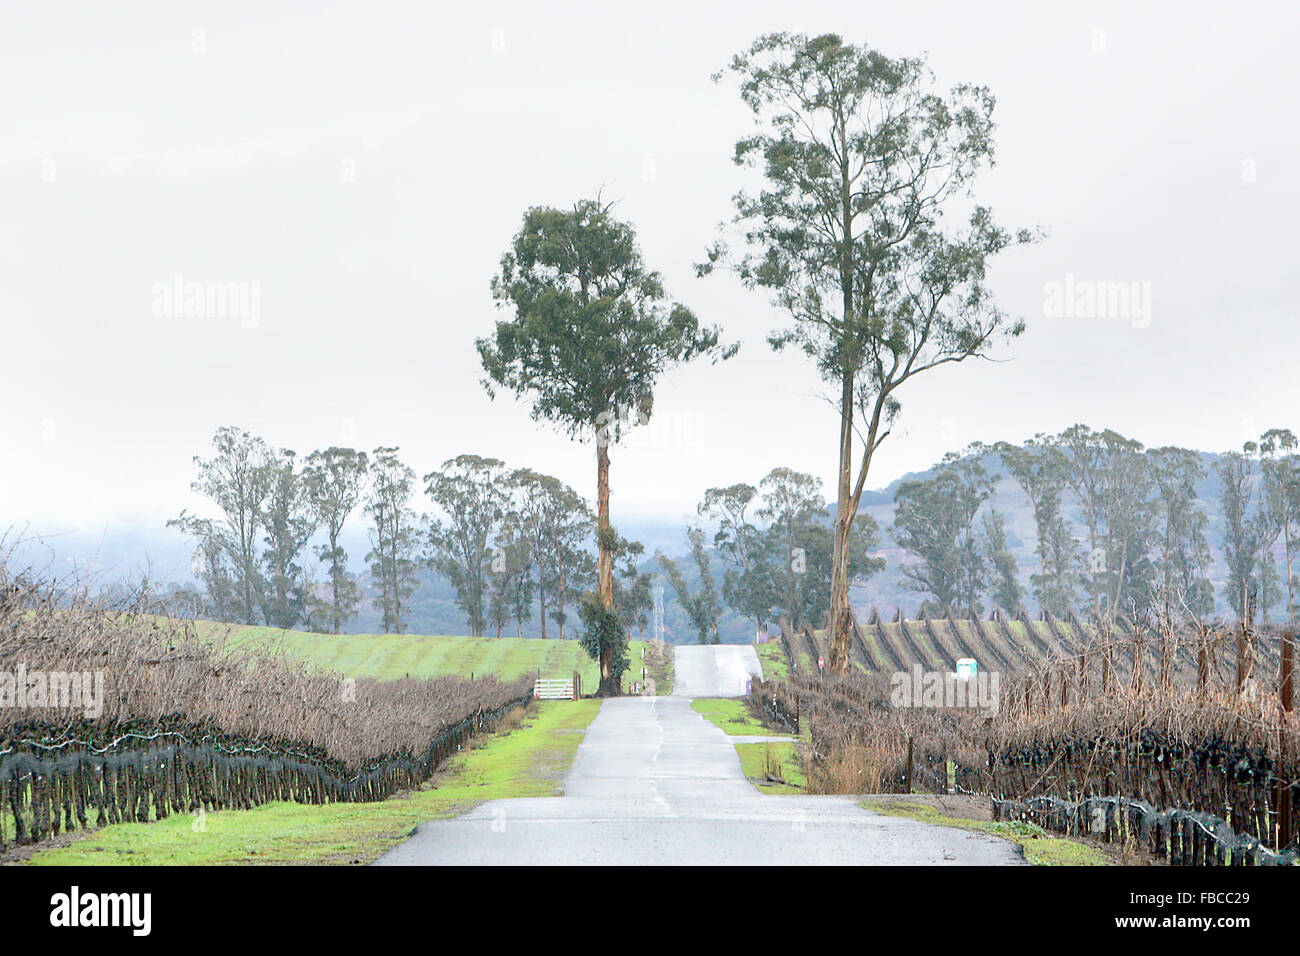 Napa, CA, USA. 6th Jan, 2016. Napa County supervisors are discussing the impact the Vine Trail will have on adjacent vineyards. This trail, near Cuttings Wharf Road, is not part of the Vine Trail but runs in close proximity to existing vineyards. © Napa Valley Register/ZUMA Wire/Alamy Live News Stock Photo